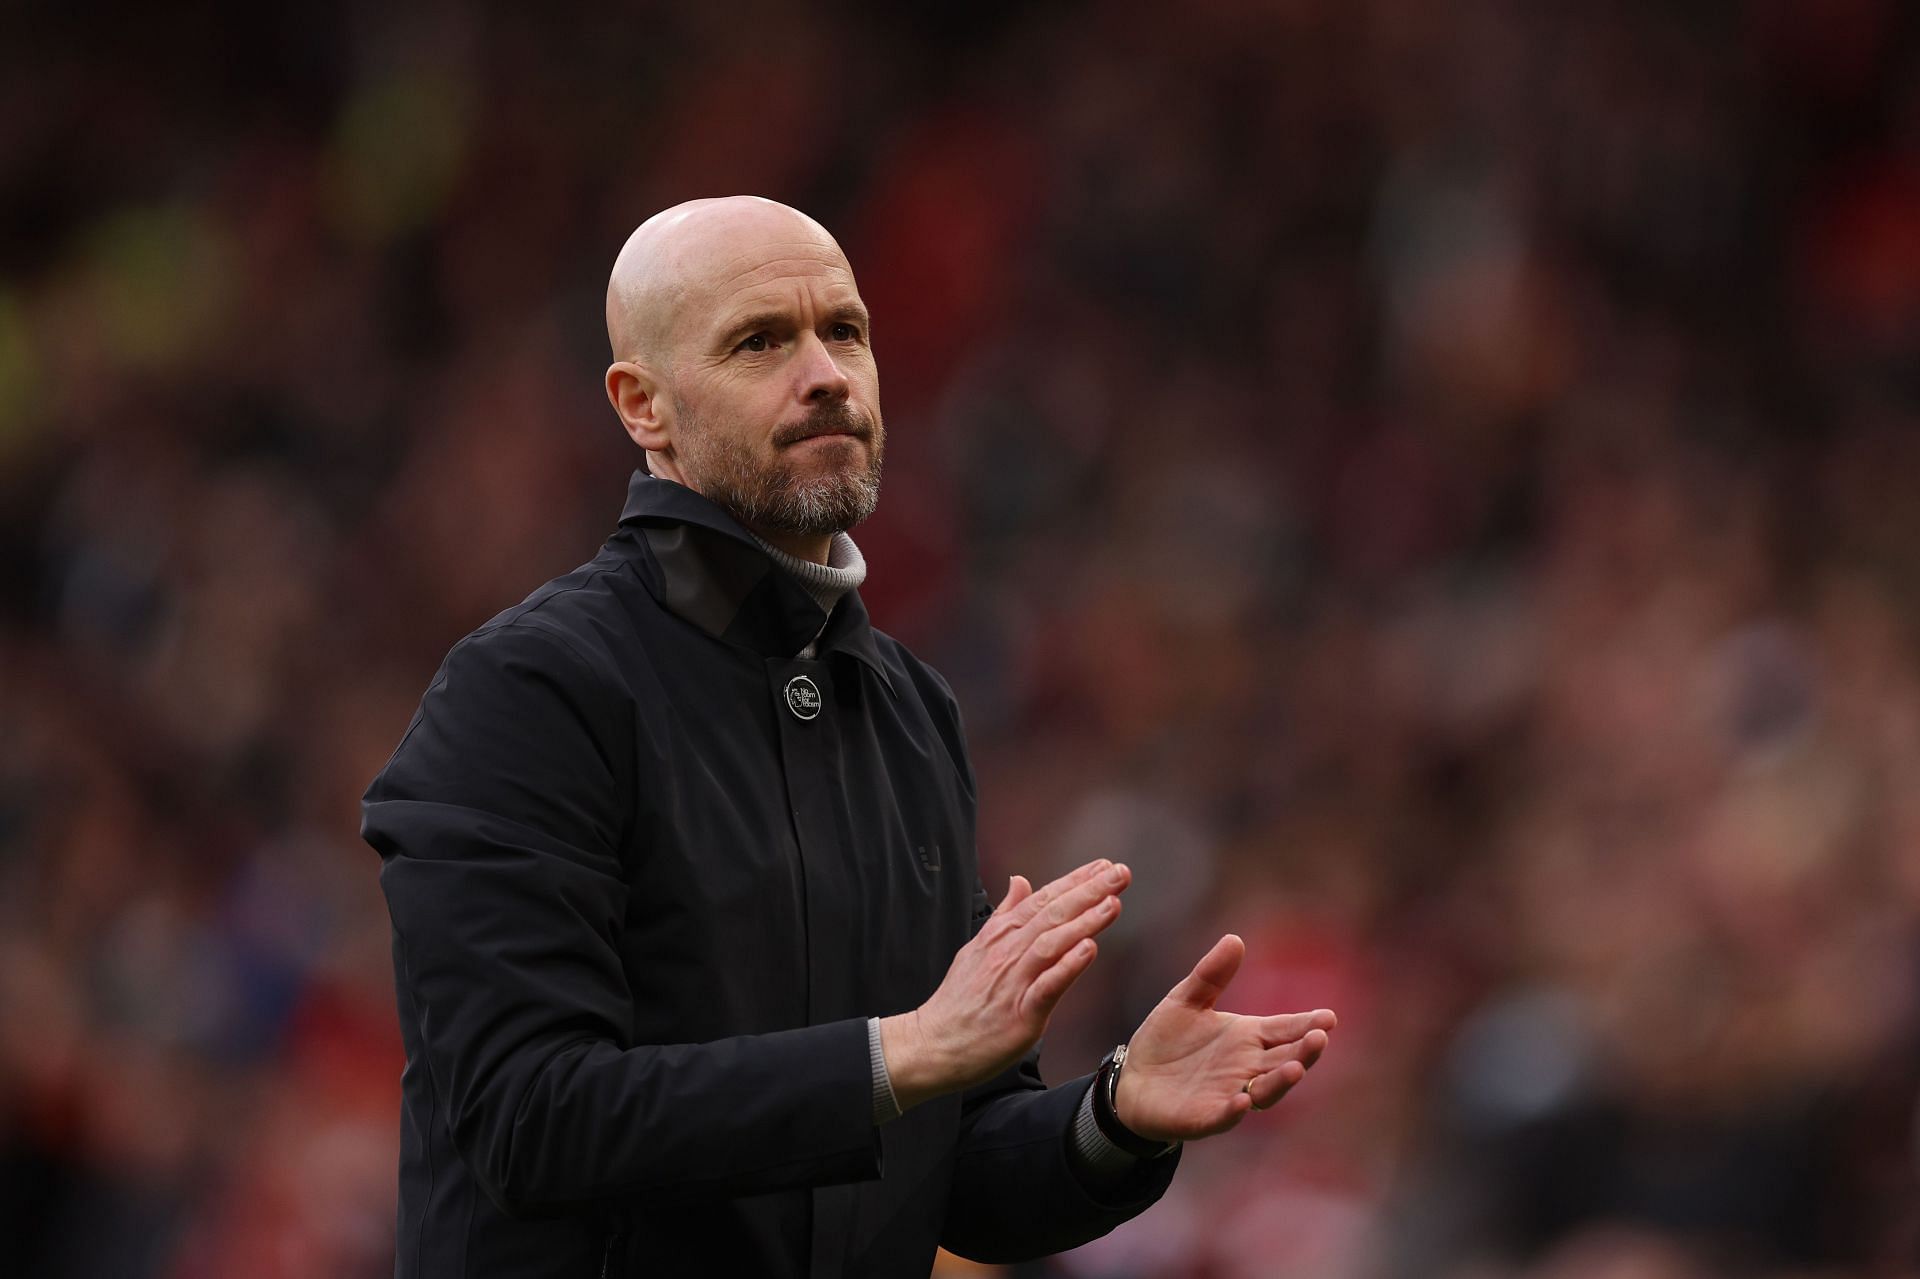 Erik ten Hag will likely be working under new owners in the summer.